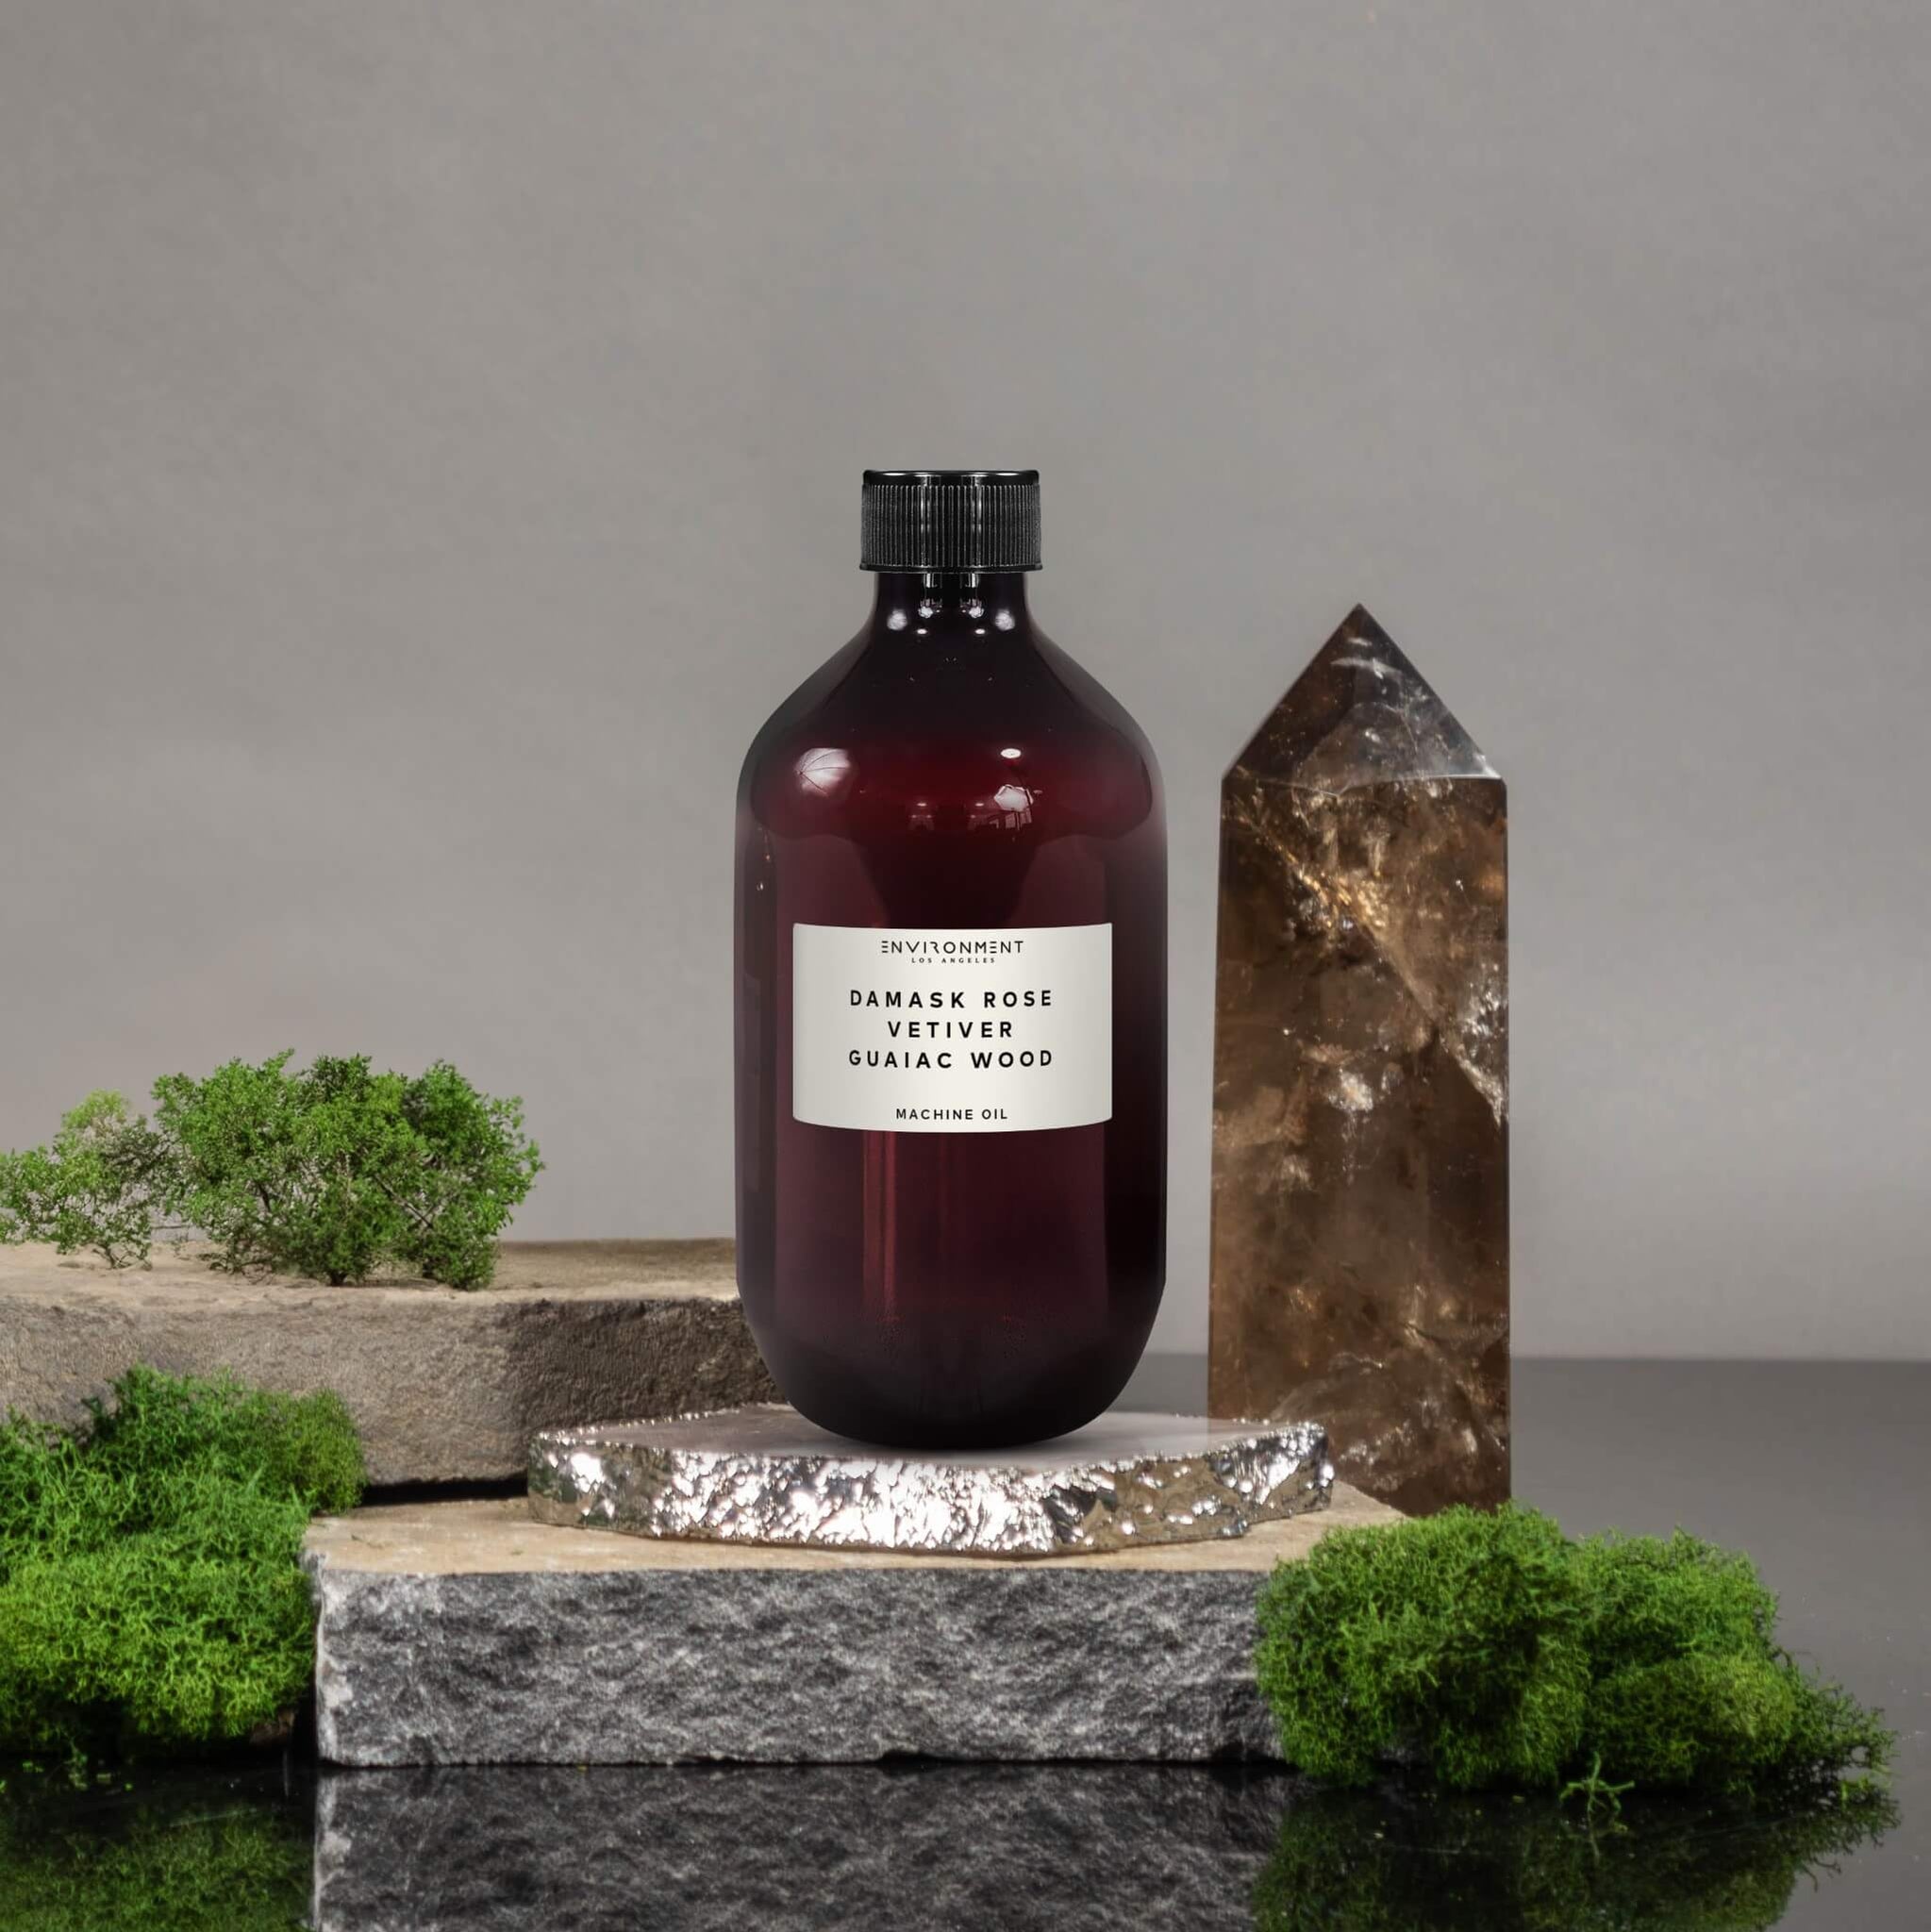 16oz Damask Rose | Vetiver | Guaiac Wood Machine Diffusing Oil (Inspired by Le Labo Rose 31® and Fairmont Hotel®)